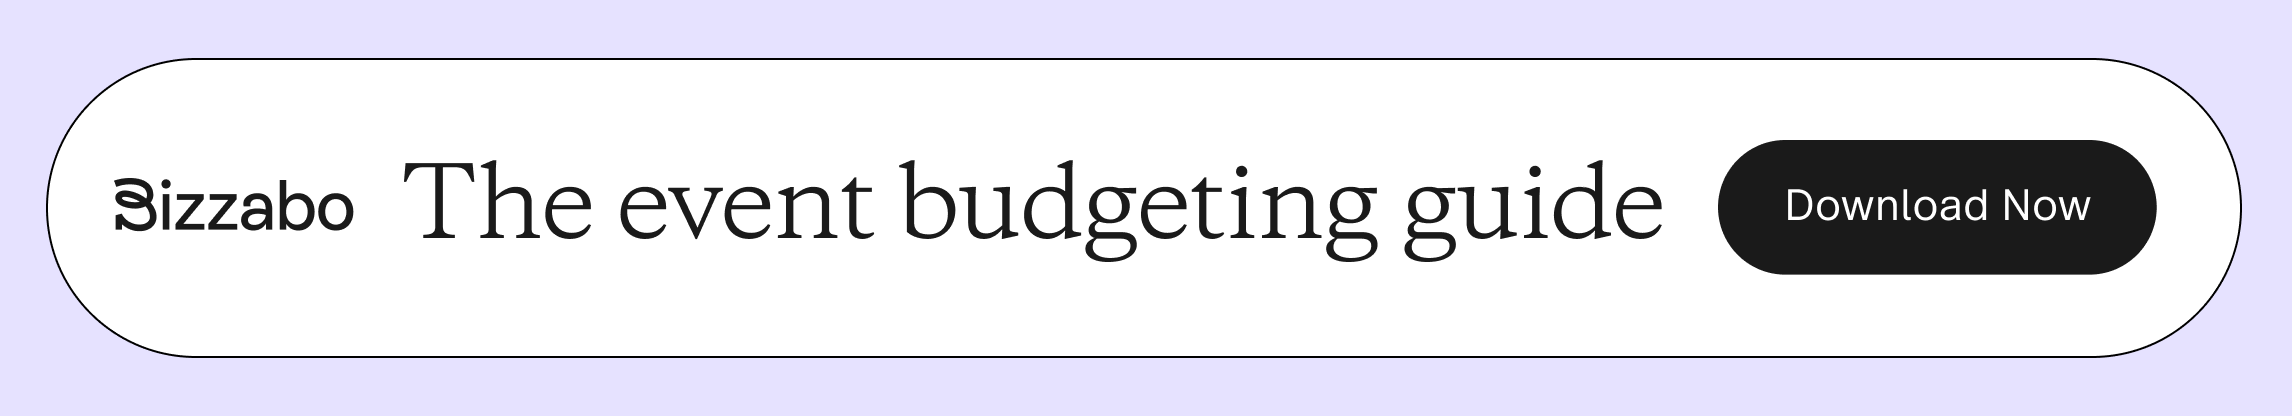 The Event Budgeting Guide for In-Person, Hybrid, and Virtual Events